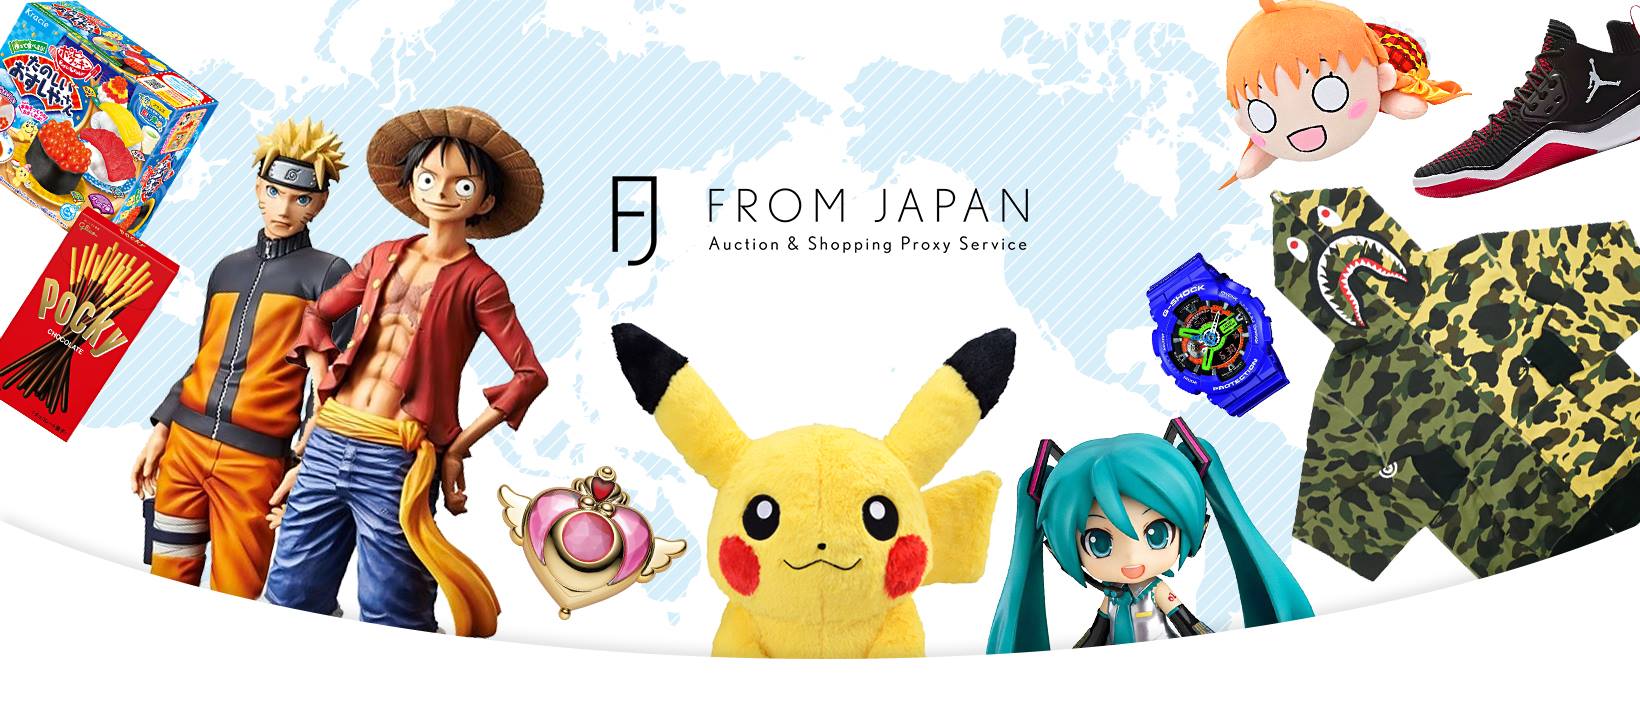 FROM JAPAN proxy service